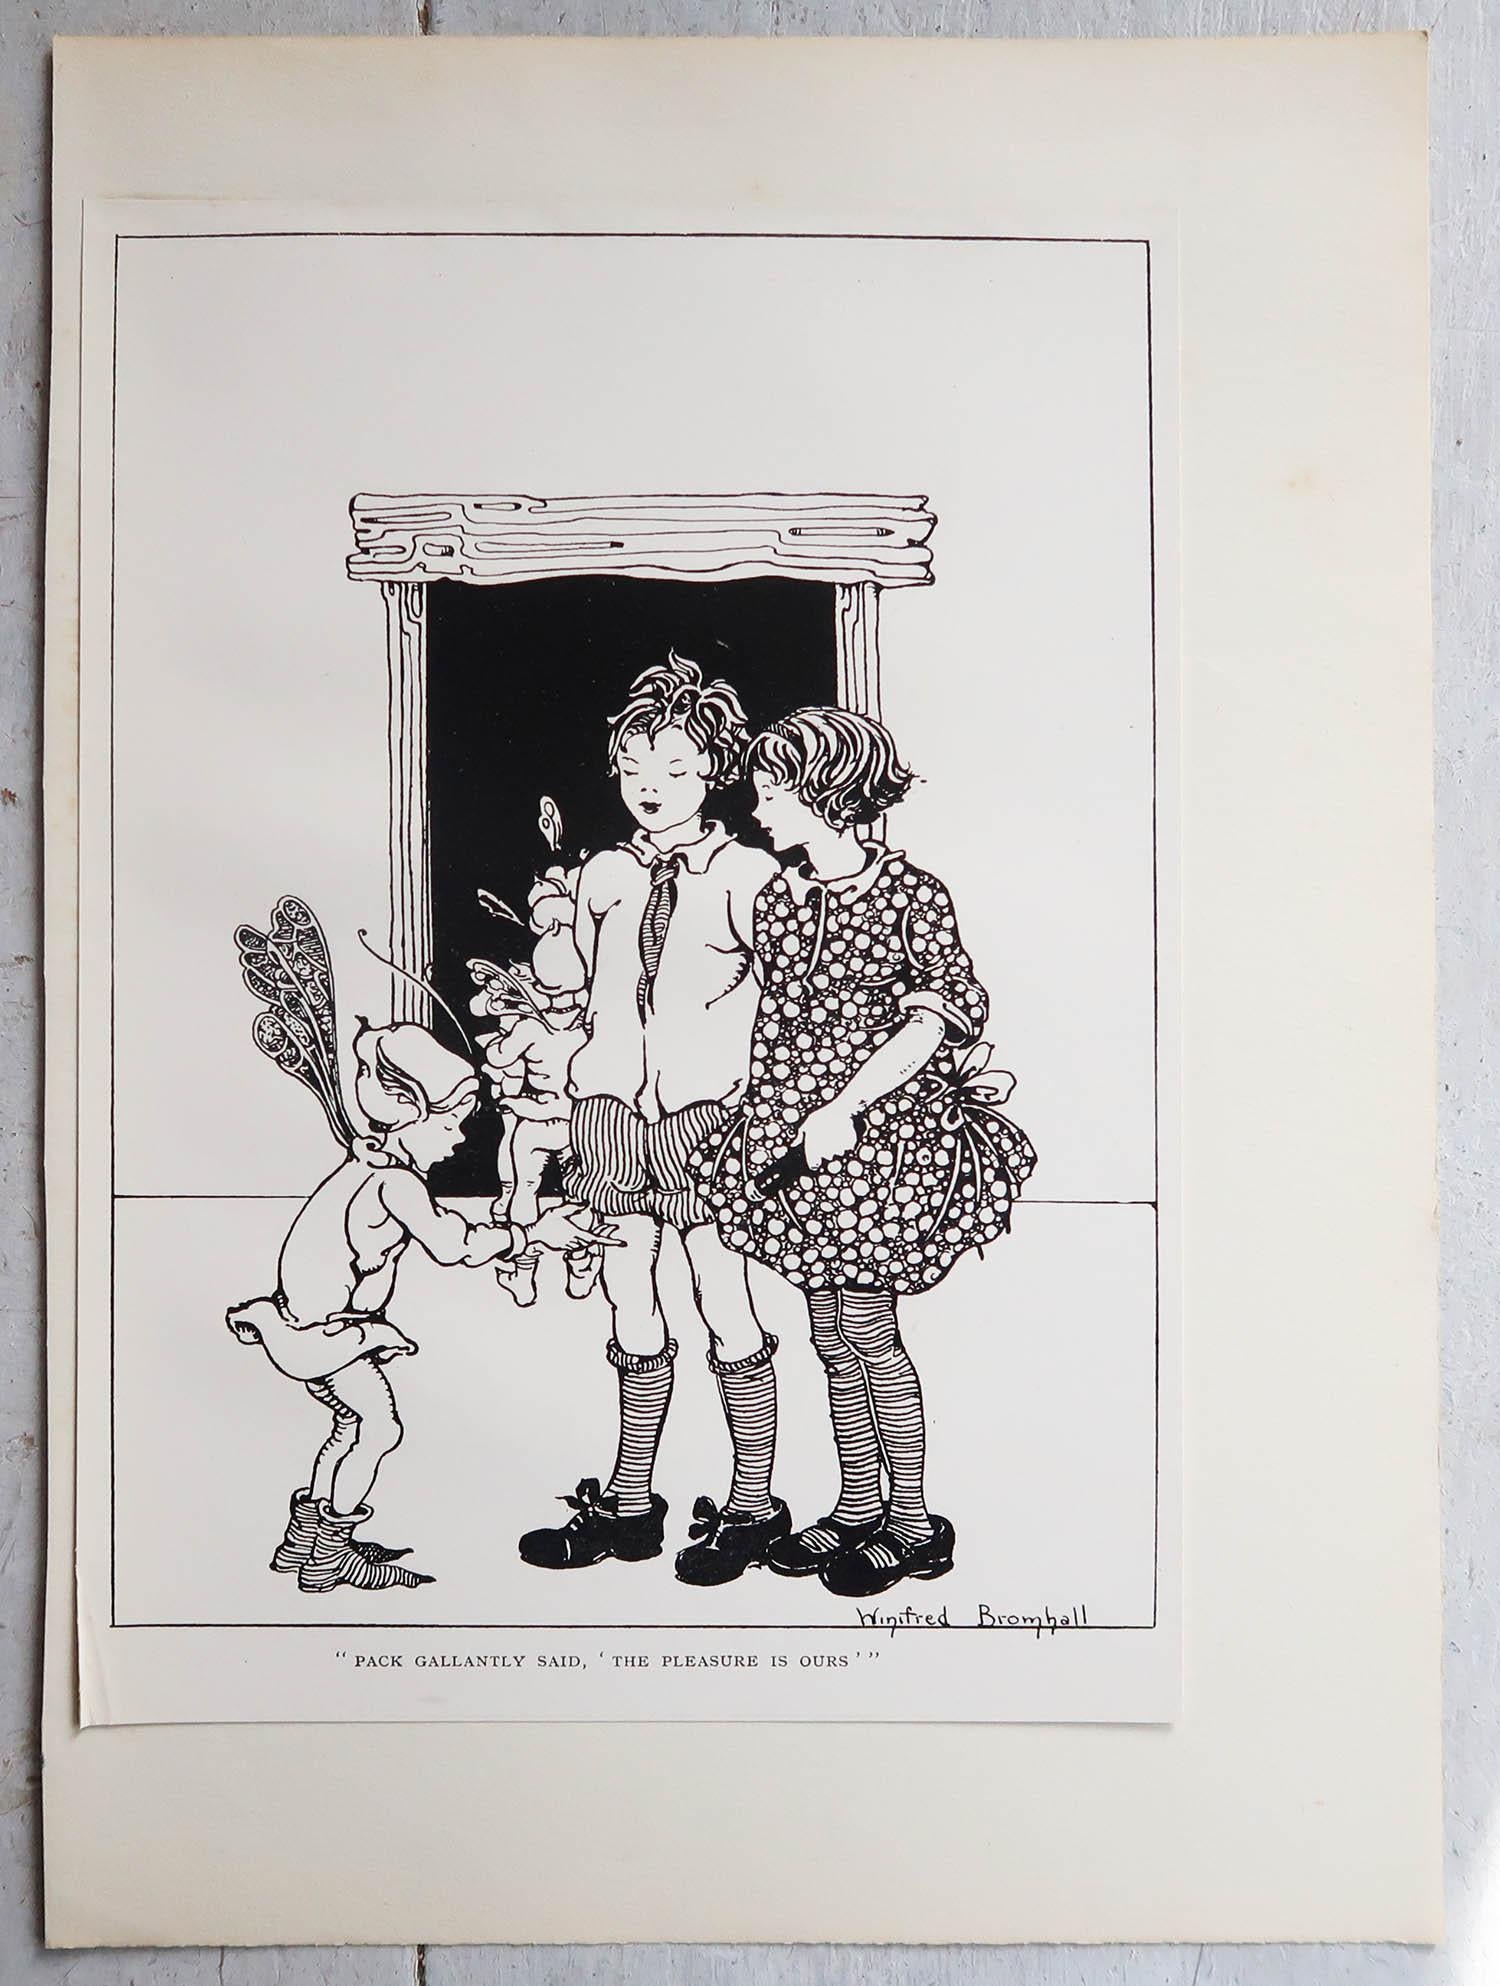 Early 20th Century Set of 6 Original Vintage Prints After Winifred Bromhall, Children, Fairies